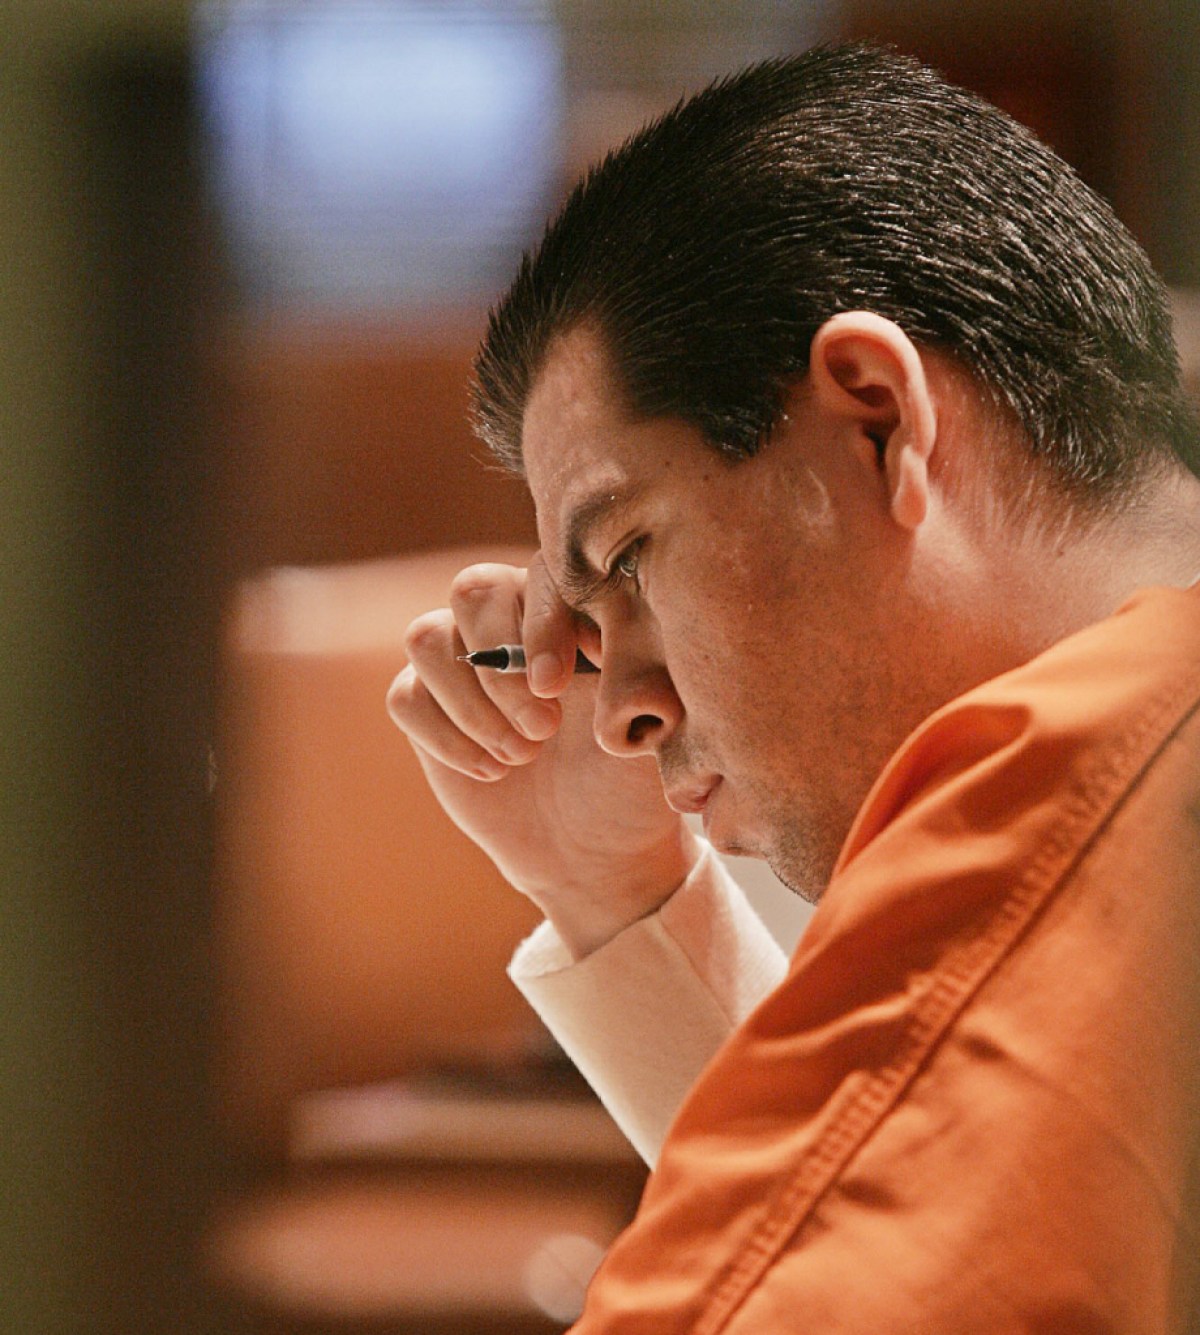 Anthony Sanchez sits in a Cleveland County courtroom during a preliminary hearing in Norman, Okla., Wednesday, Feb. 23, 2005. Sanchez is  accused in the murder of of University of Oklahoma ballet student Jewell "Juli" Busken.  (AP Photo/The Oklahoman, Jaconna Aguirre)